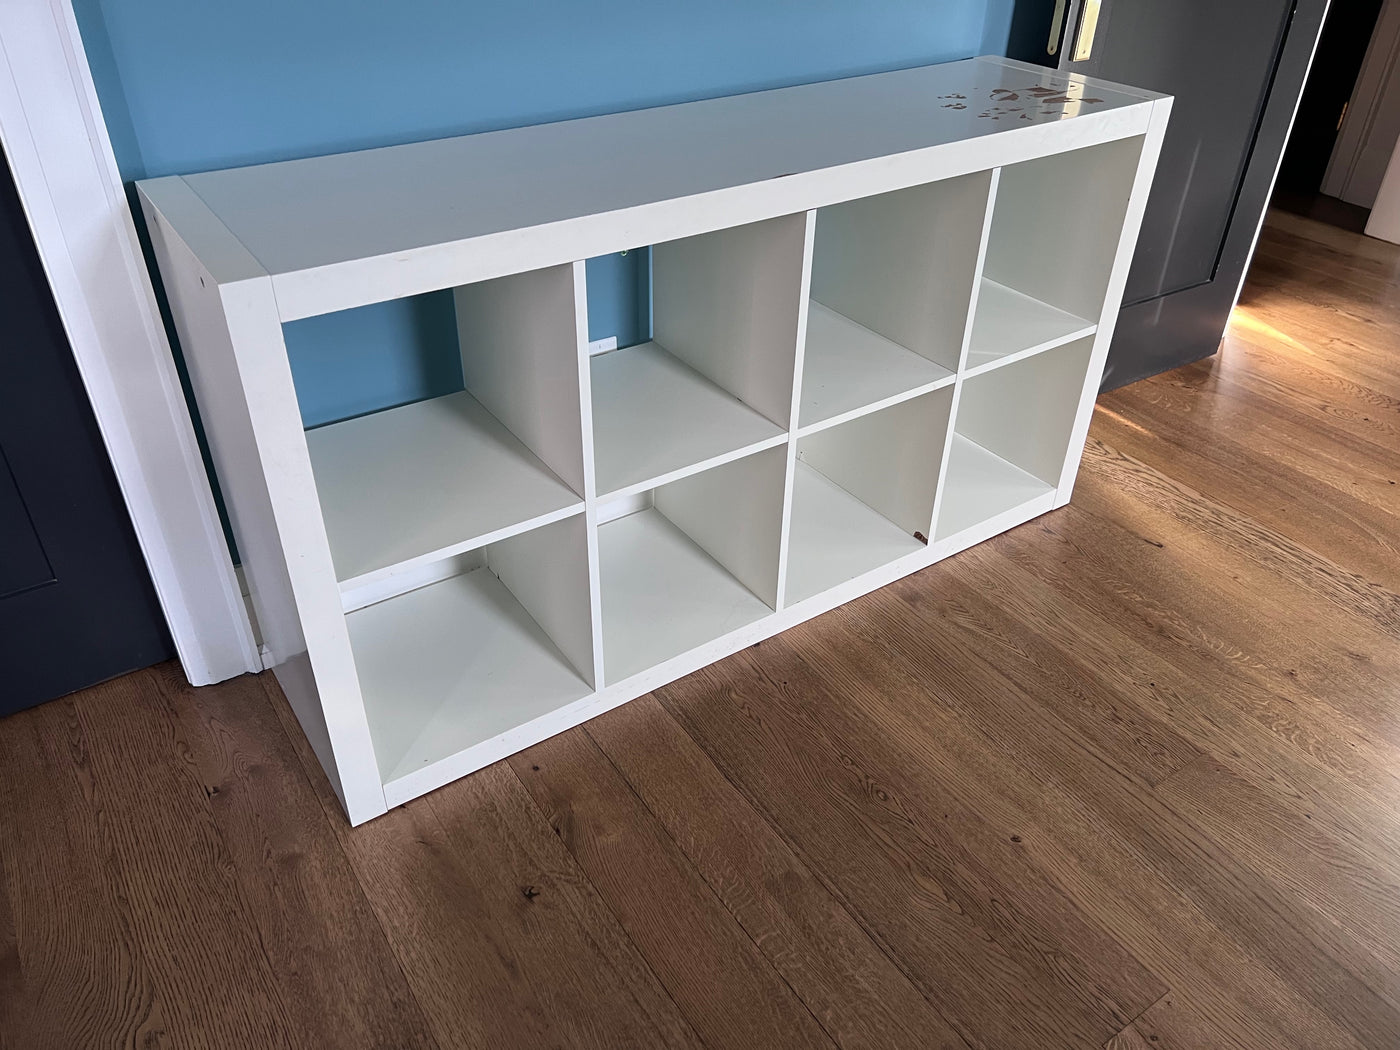 IKEA KALLAX Shelf unit, white (*3 Available) – Sell My Stuff Canada -  Canada's Content and Estate Sale Specialists